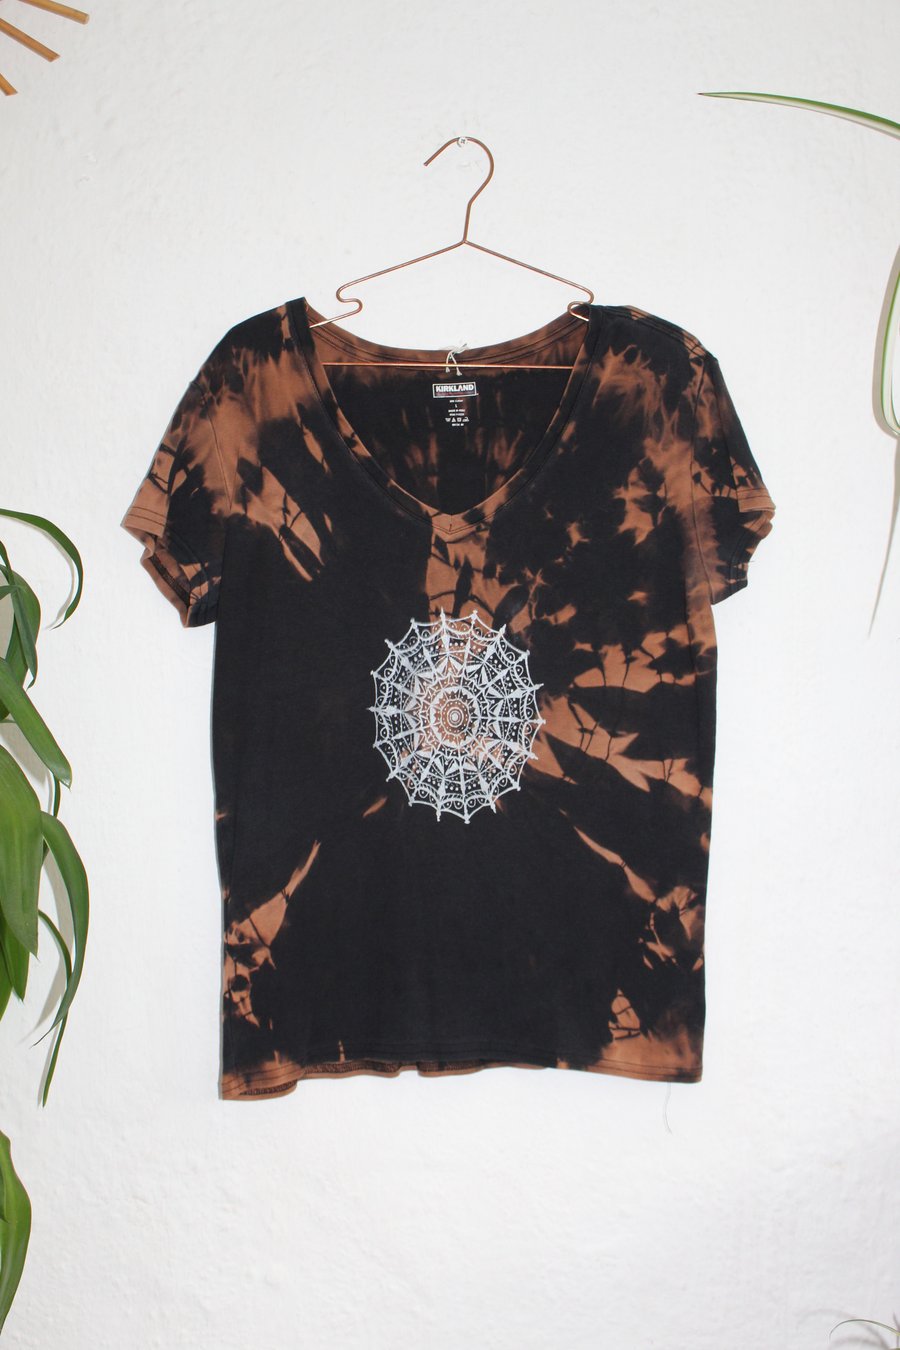 Ladies size L T shirt, reworked Eco tie dyed clothing,white mandala hand printed